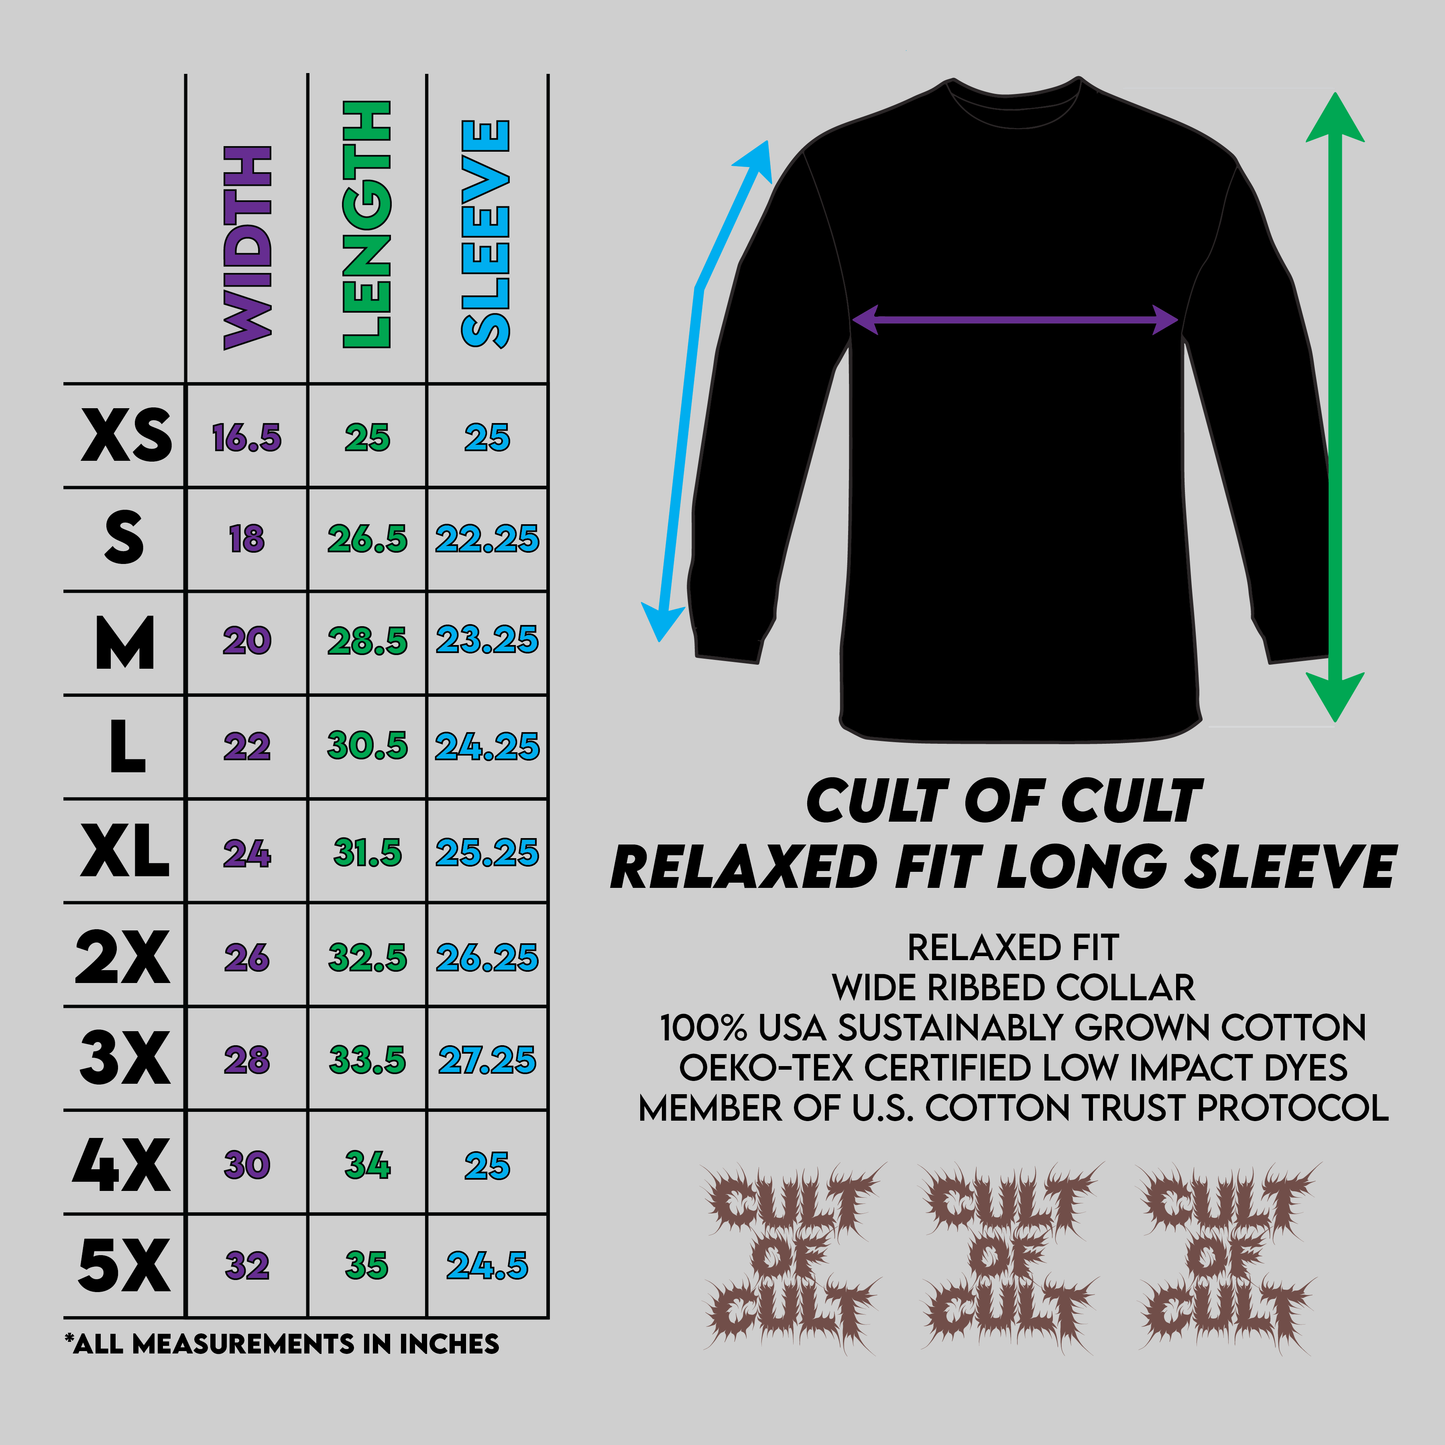 Cult of Cult long sleeve shirt sizing chart